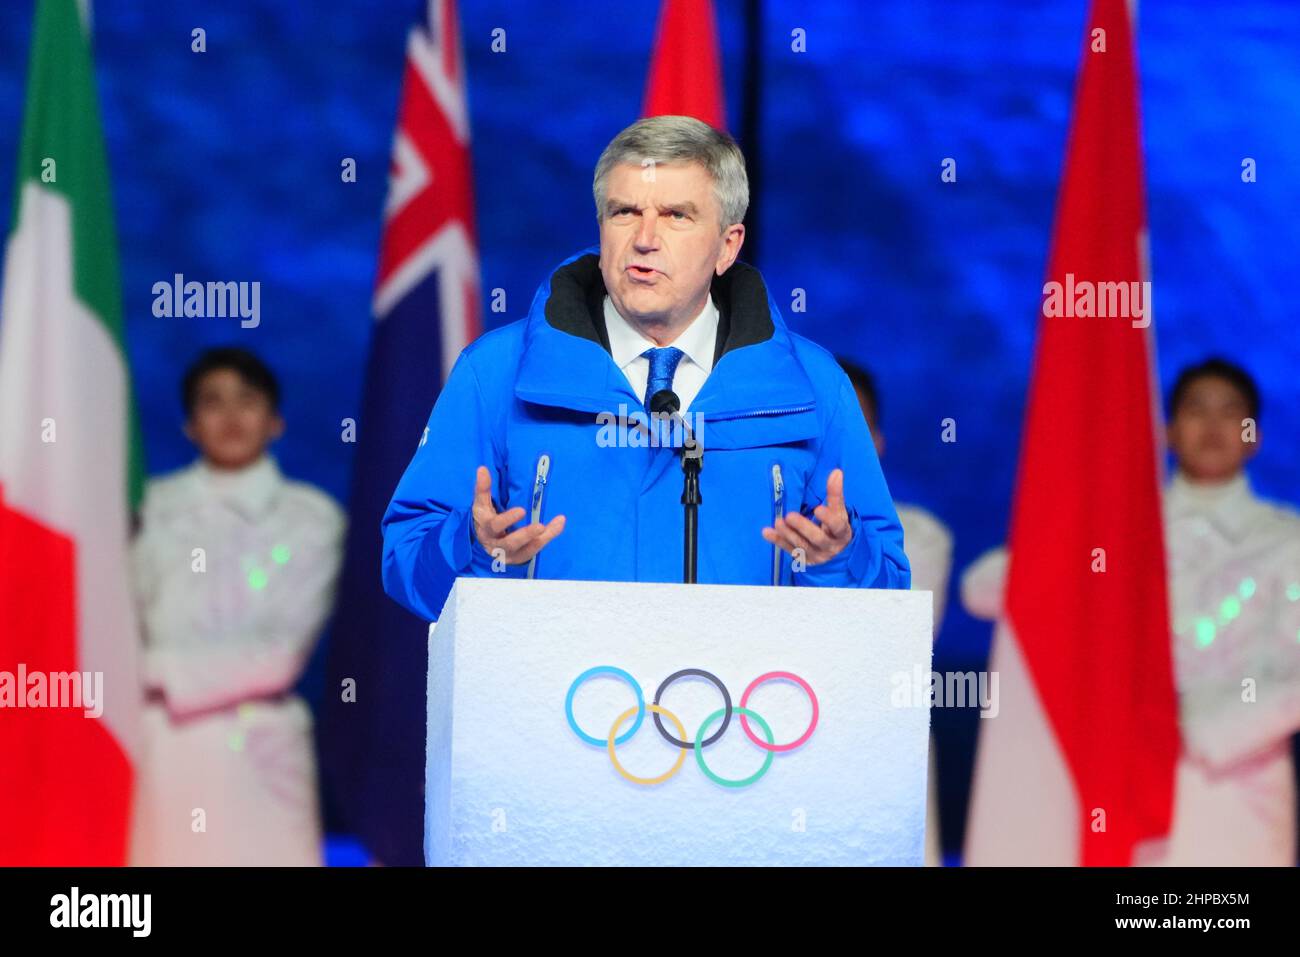 Beijing, China. 20th Feb, 2022. Caption: Olympics, Closing Ceremony of the 2022 Winter Olympic Games, at the Bird's Nest National Stadium, Thomas Bach, President of the IOC, speaks. Credit: Michael Kappeler/dpa/Alamy Live News Stock Photo